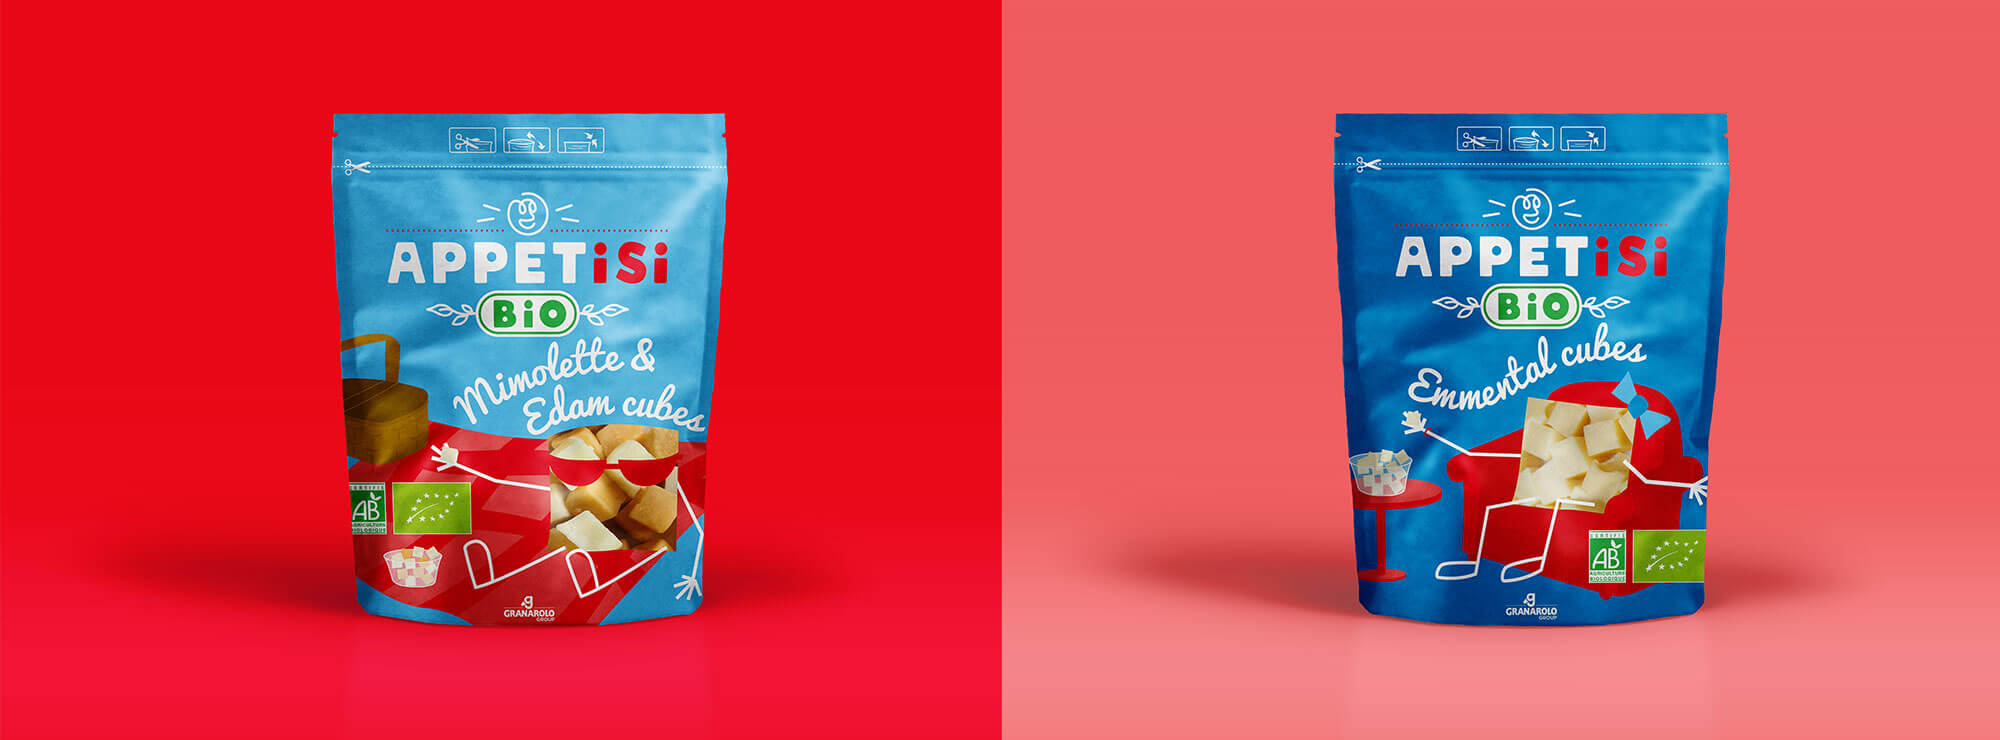 Appetisi by Granarolo - an identity package to snack on